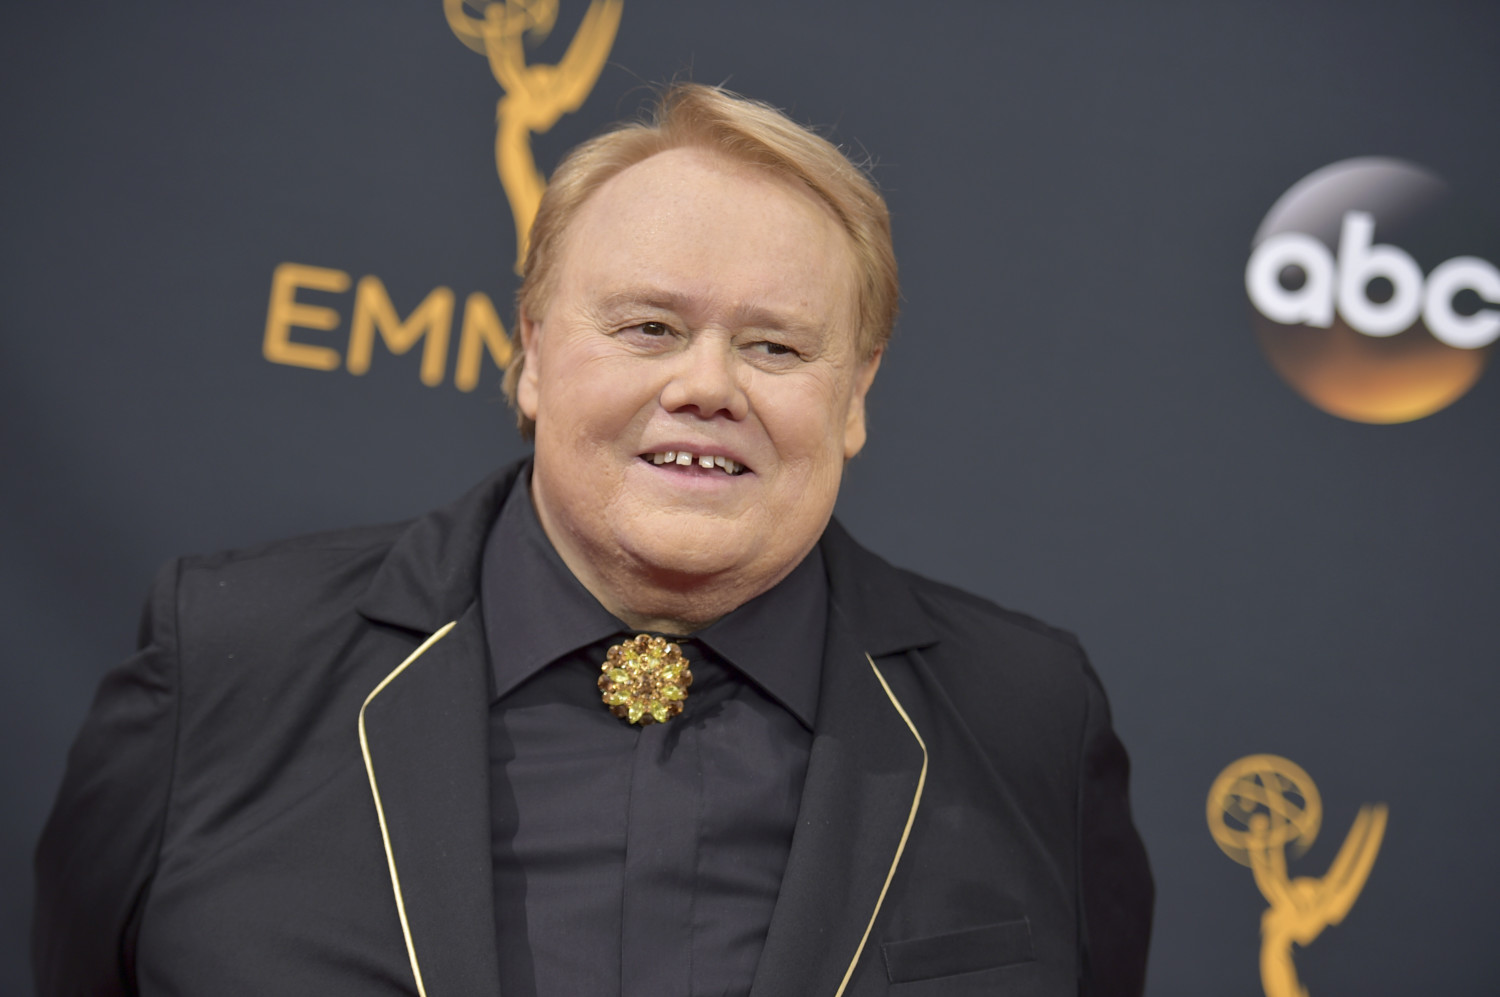 Comedian and actor Louie Anderson